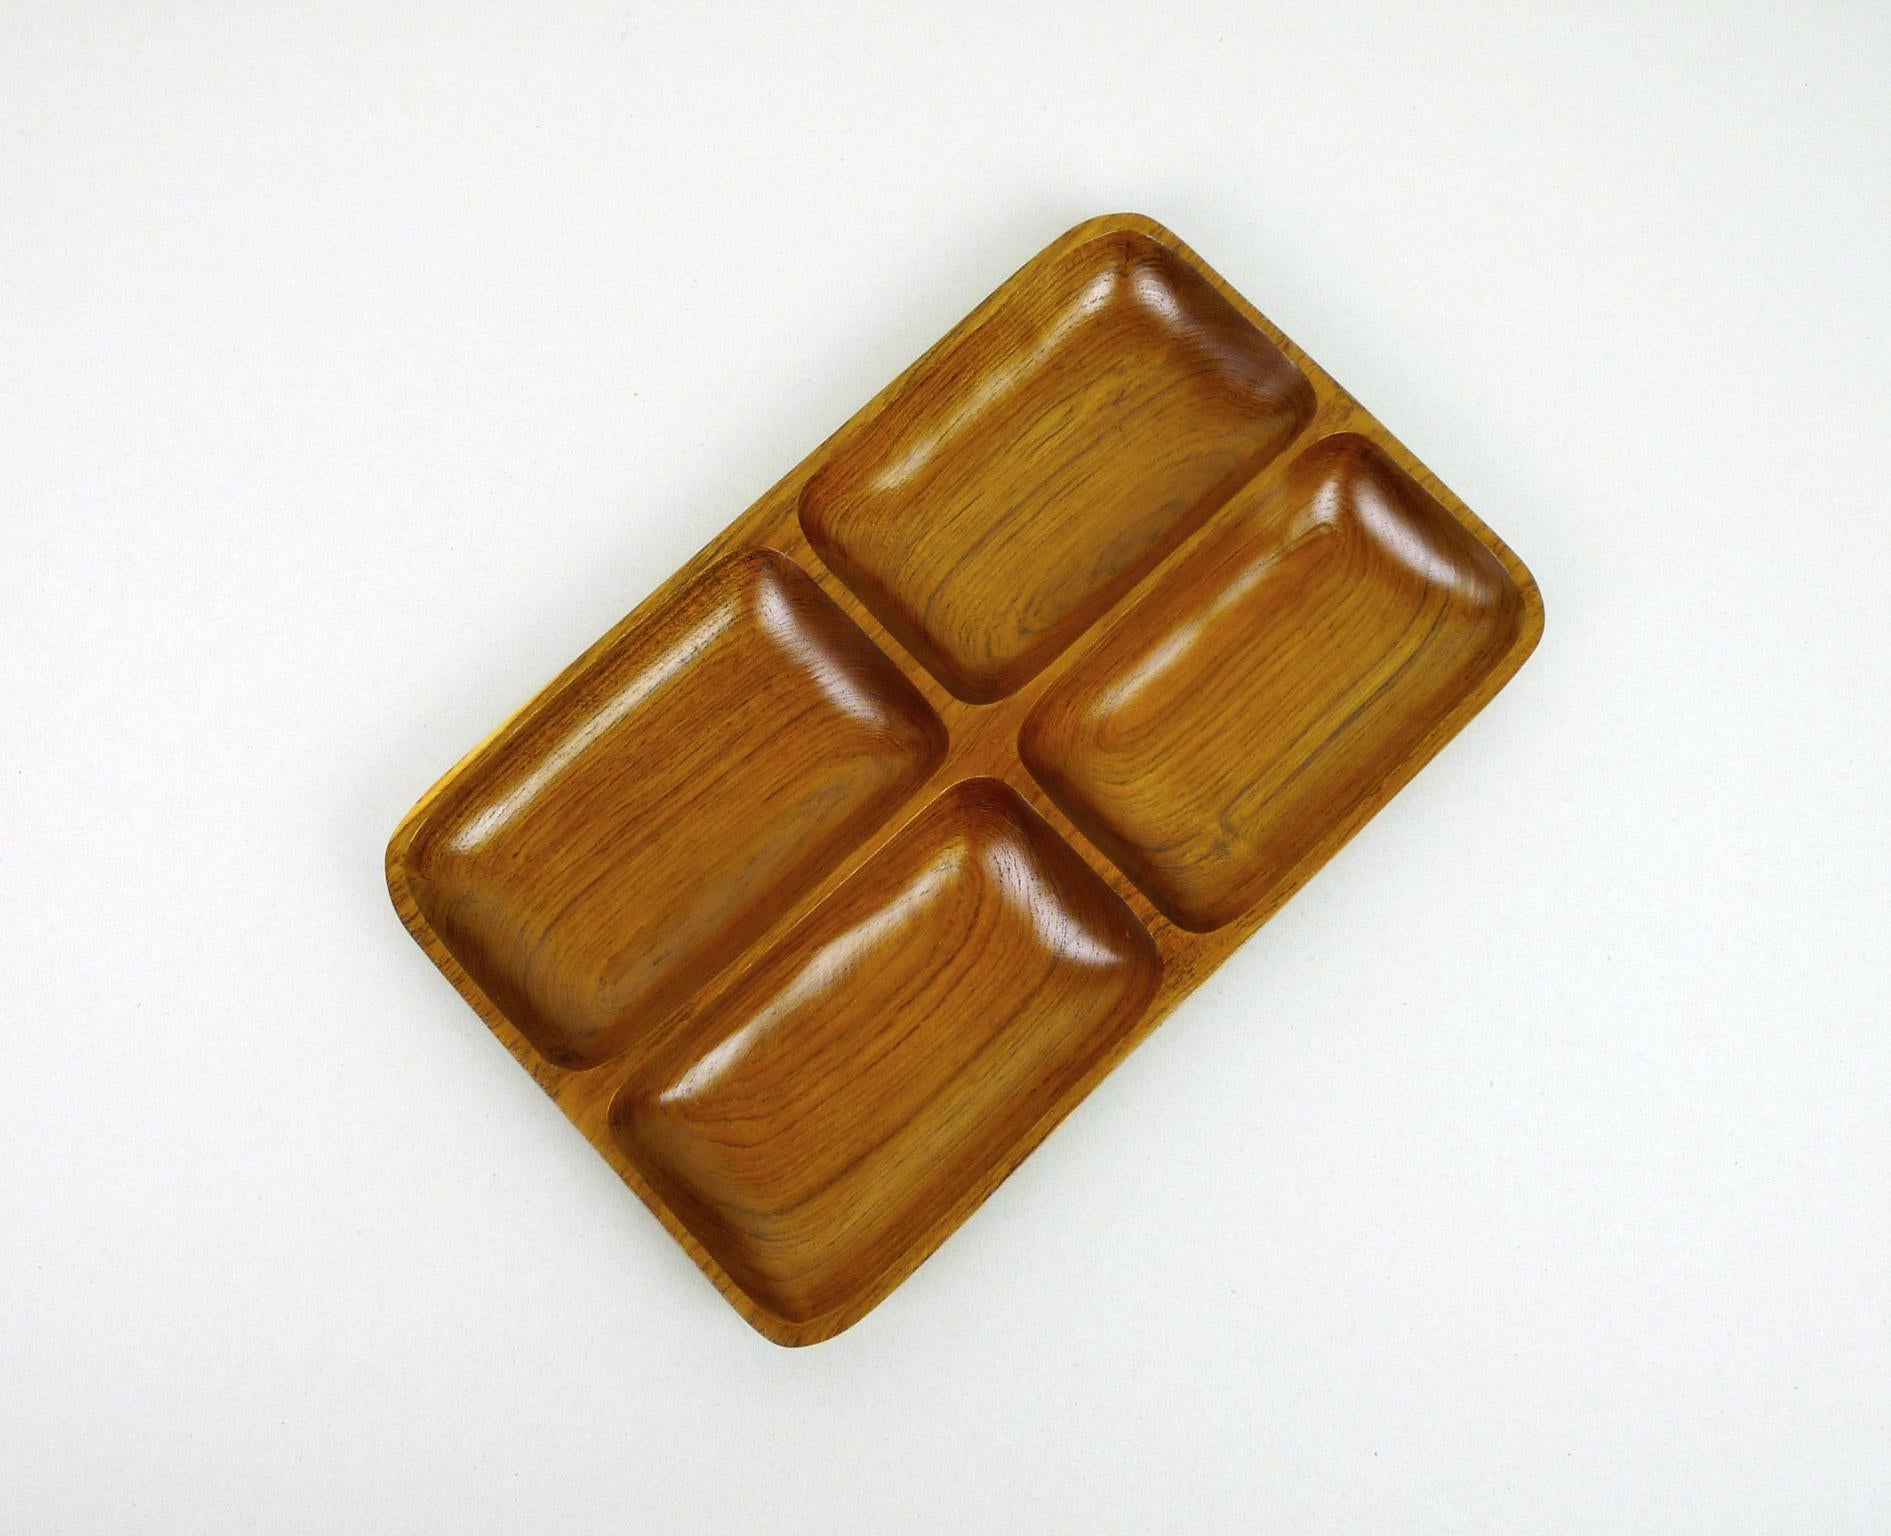 Danish Solid Teak Wood Bowl with Four Compartments, Denmark, 1960s For Sale